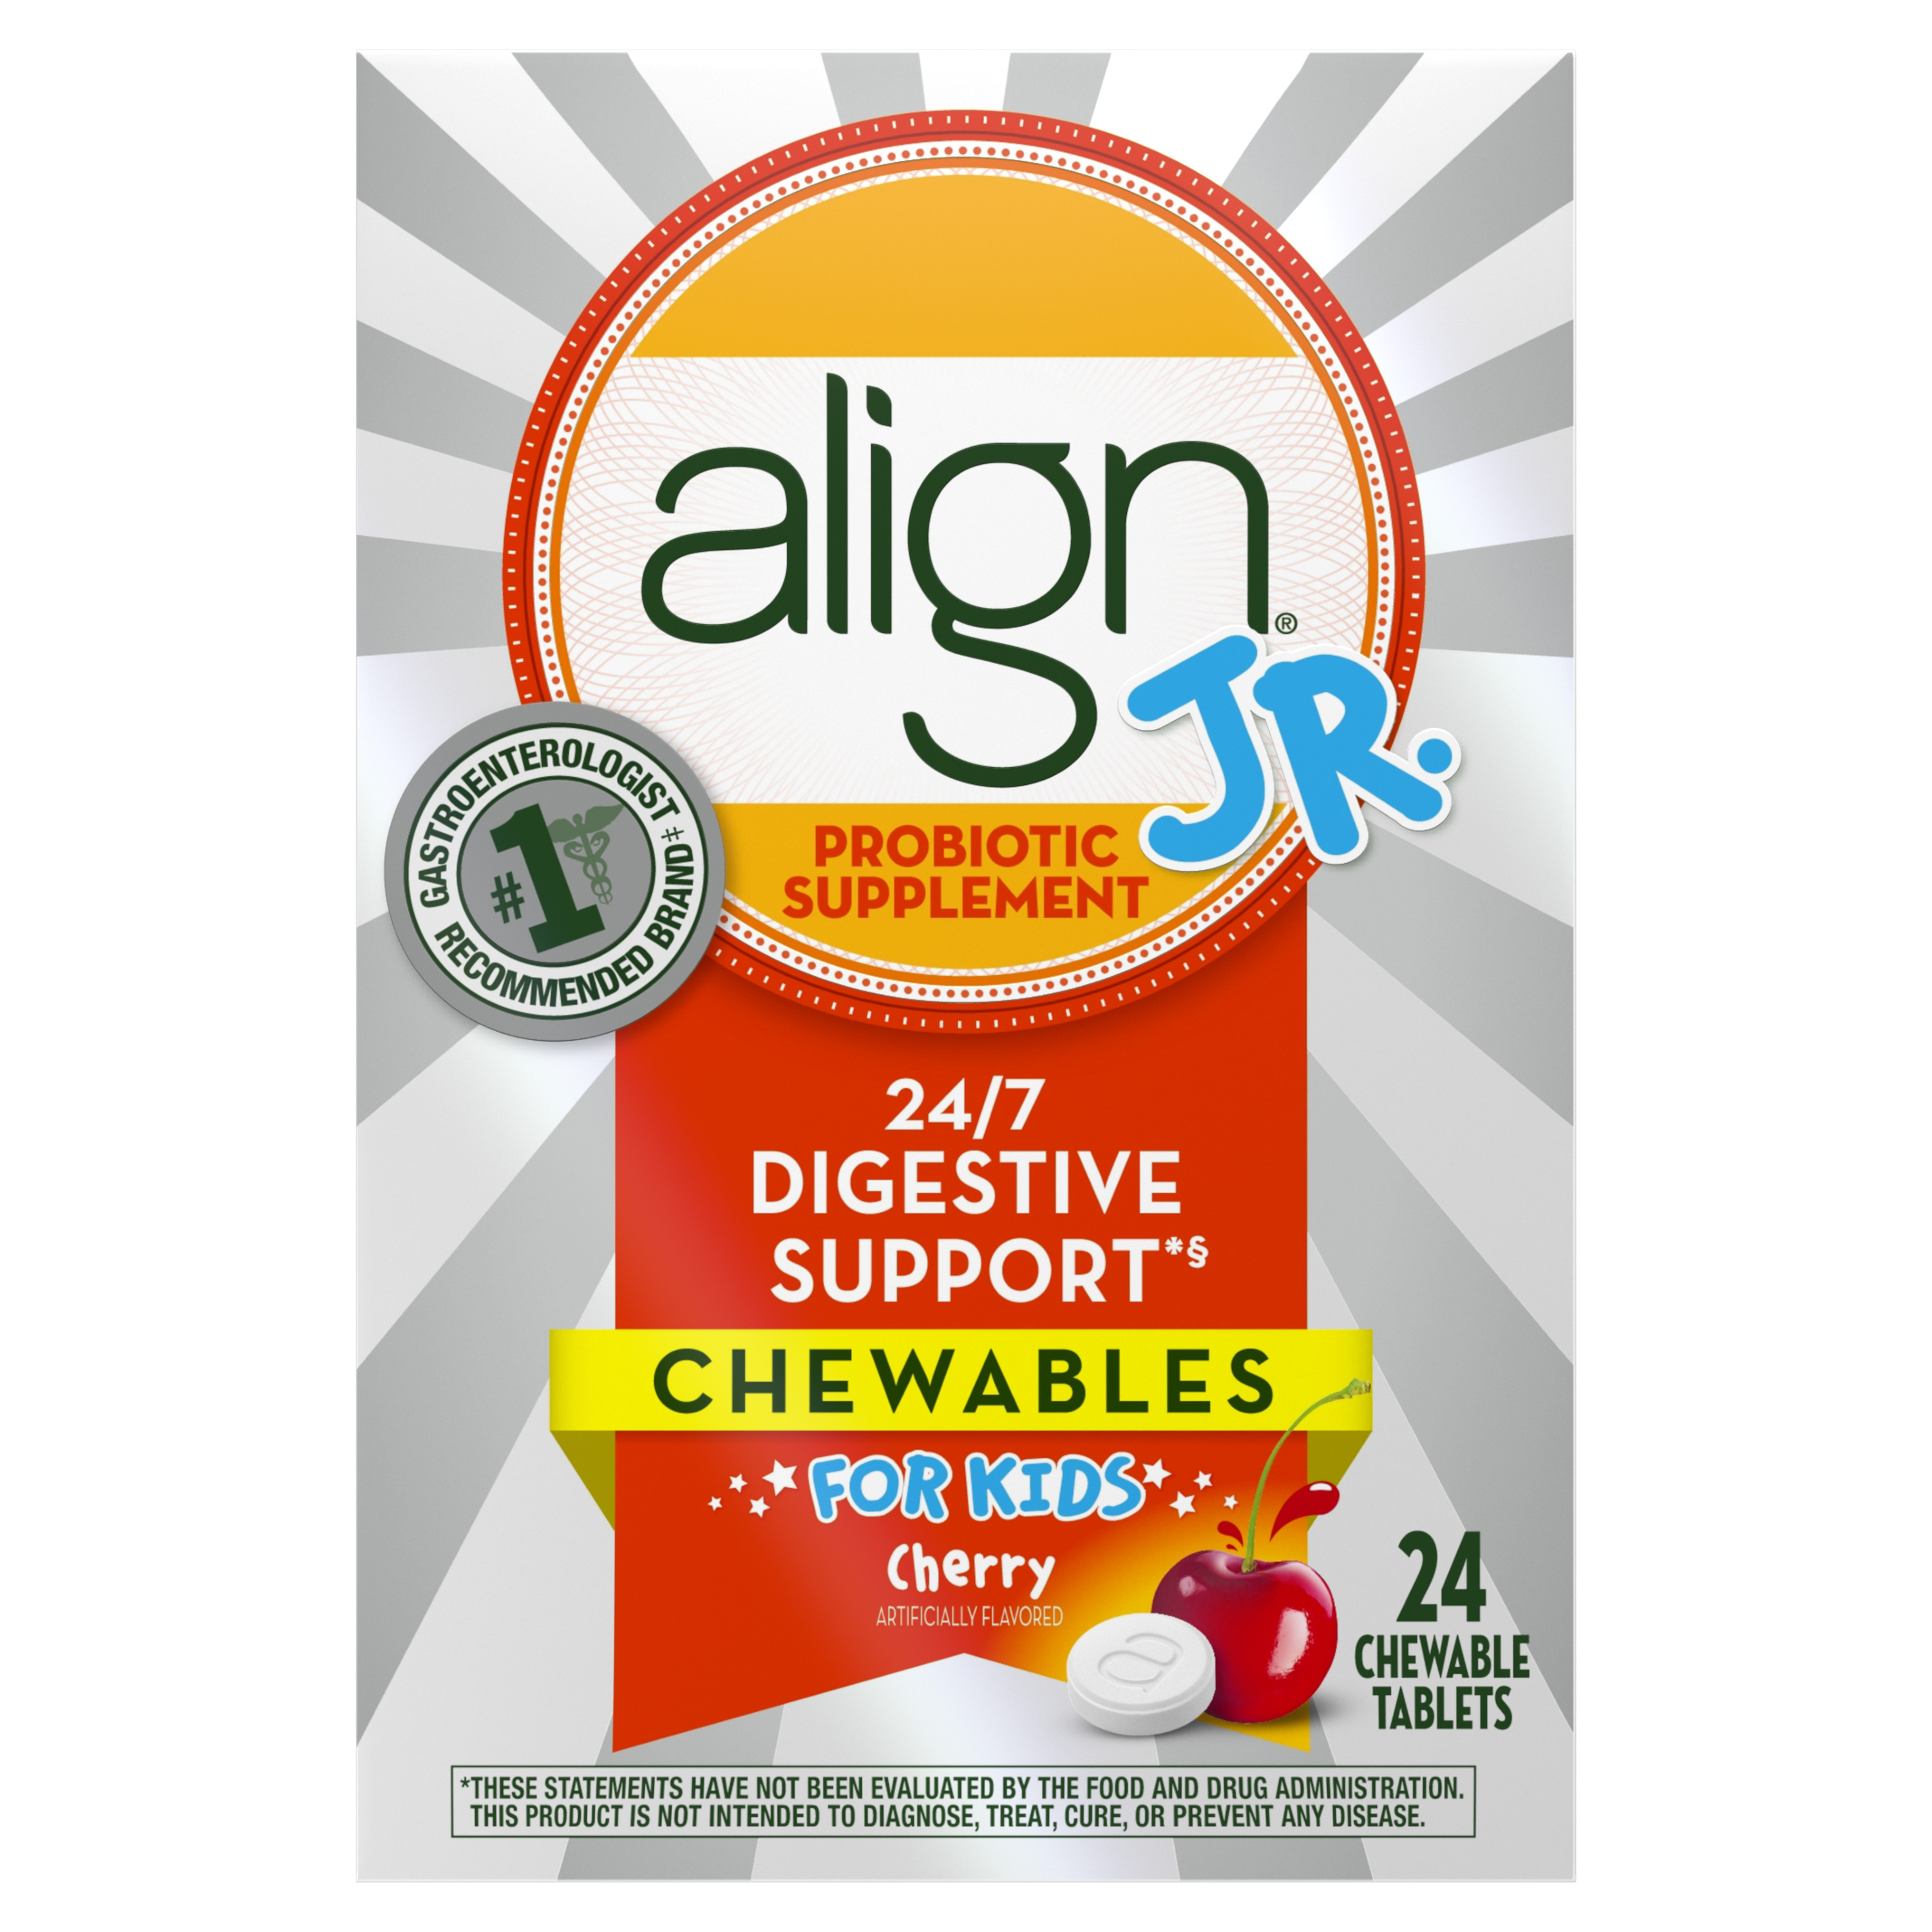 Align Jr. Chewables for Children, Daily Probiotic Supplement for Kids Digestive Health, Cherry Smoothie Flavor, 24 count, #1 Recommended Probiotic by Brand by Doctors - image 1 of 6